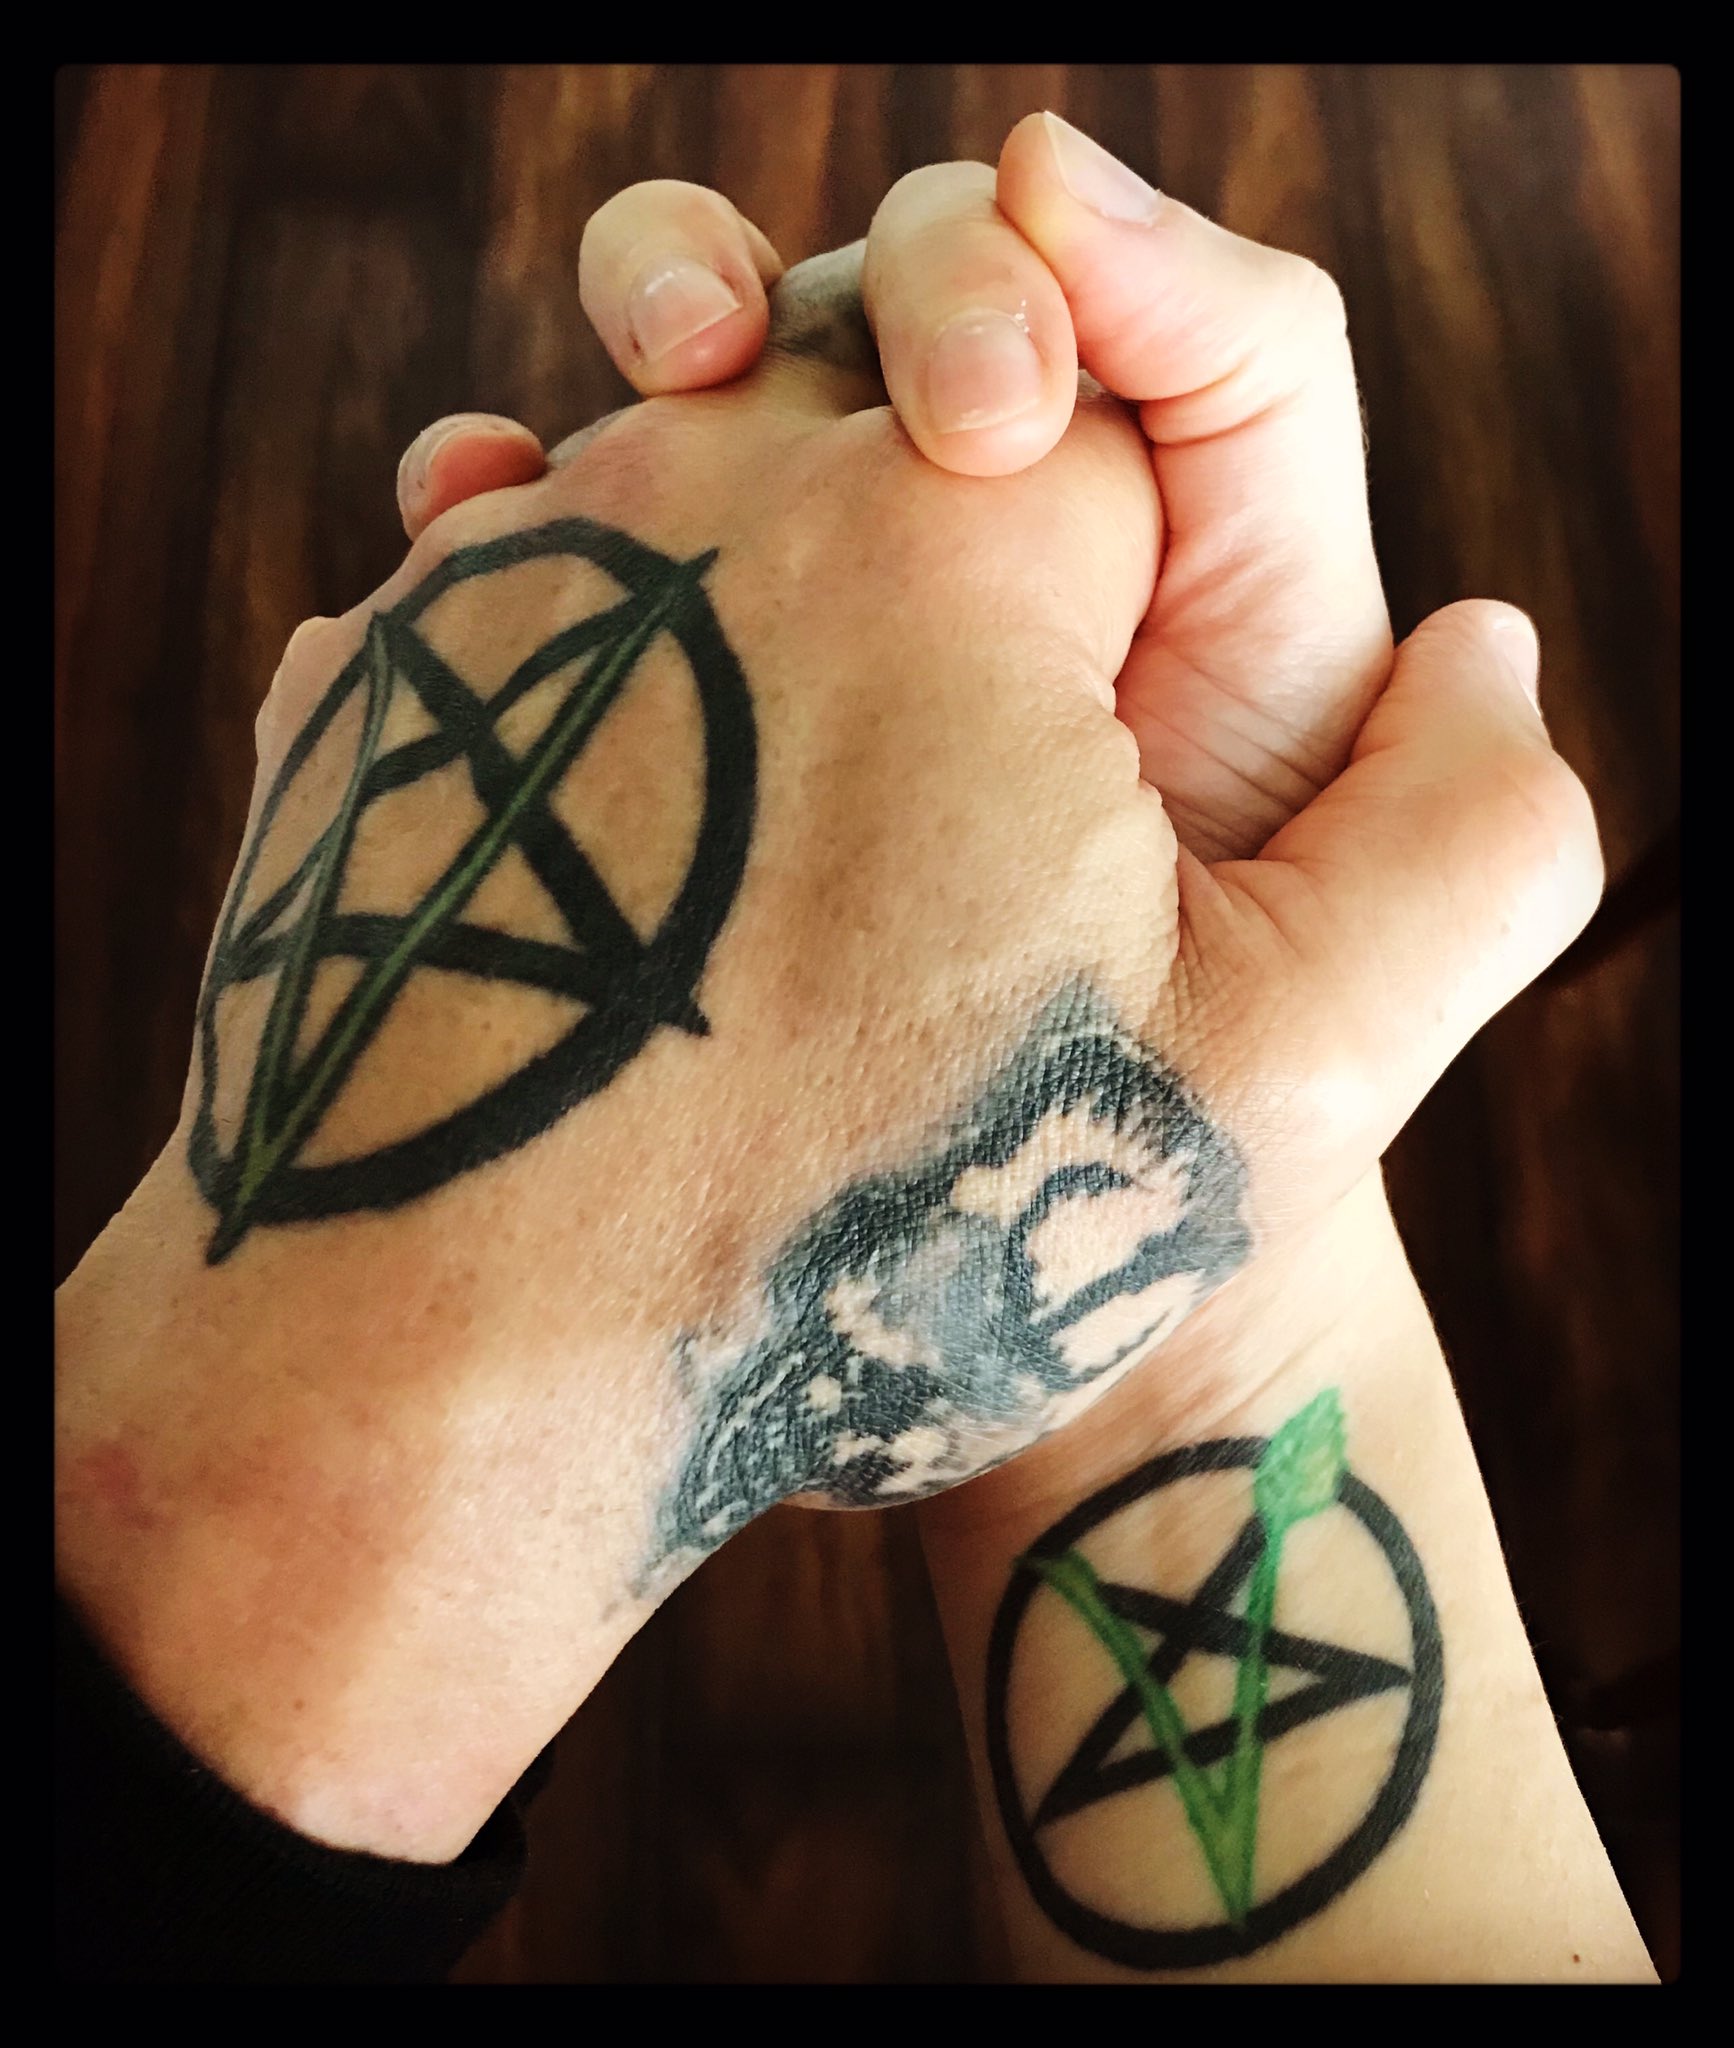 Just another pentagram by snoopydoo on DeviantArt